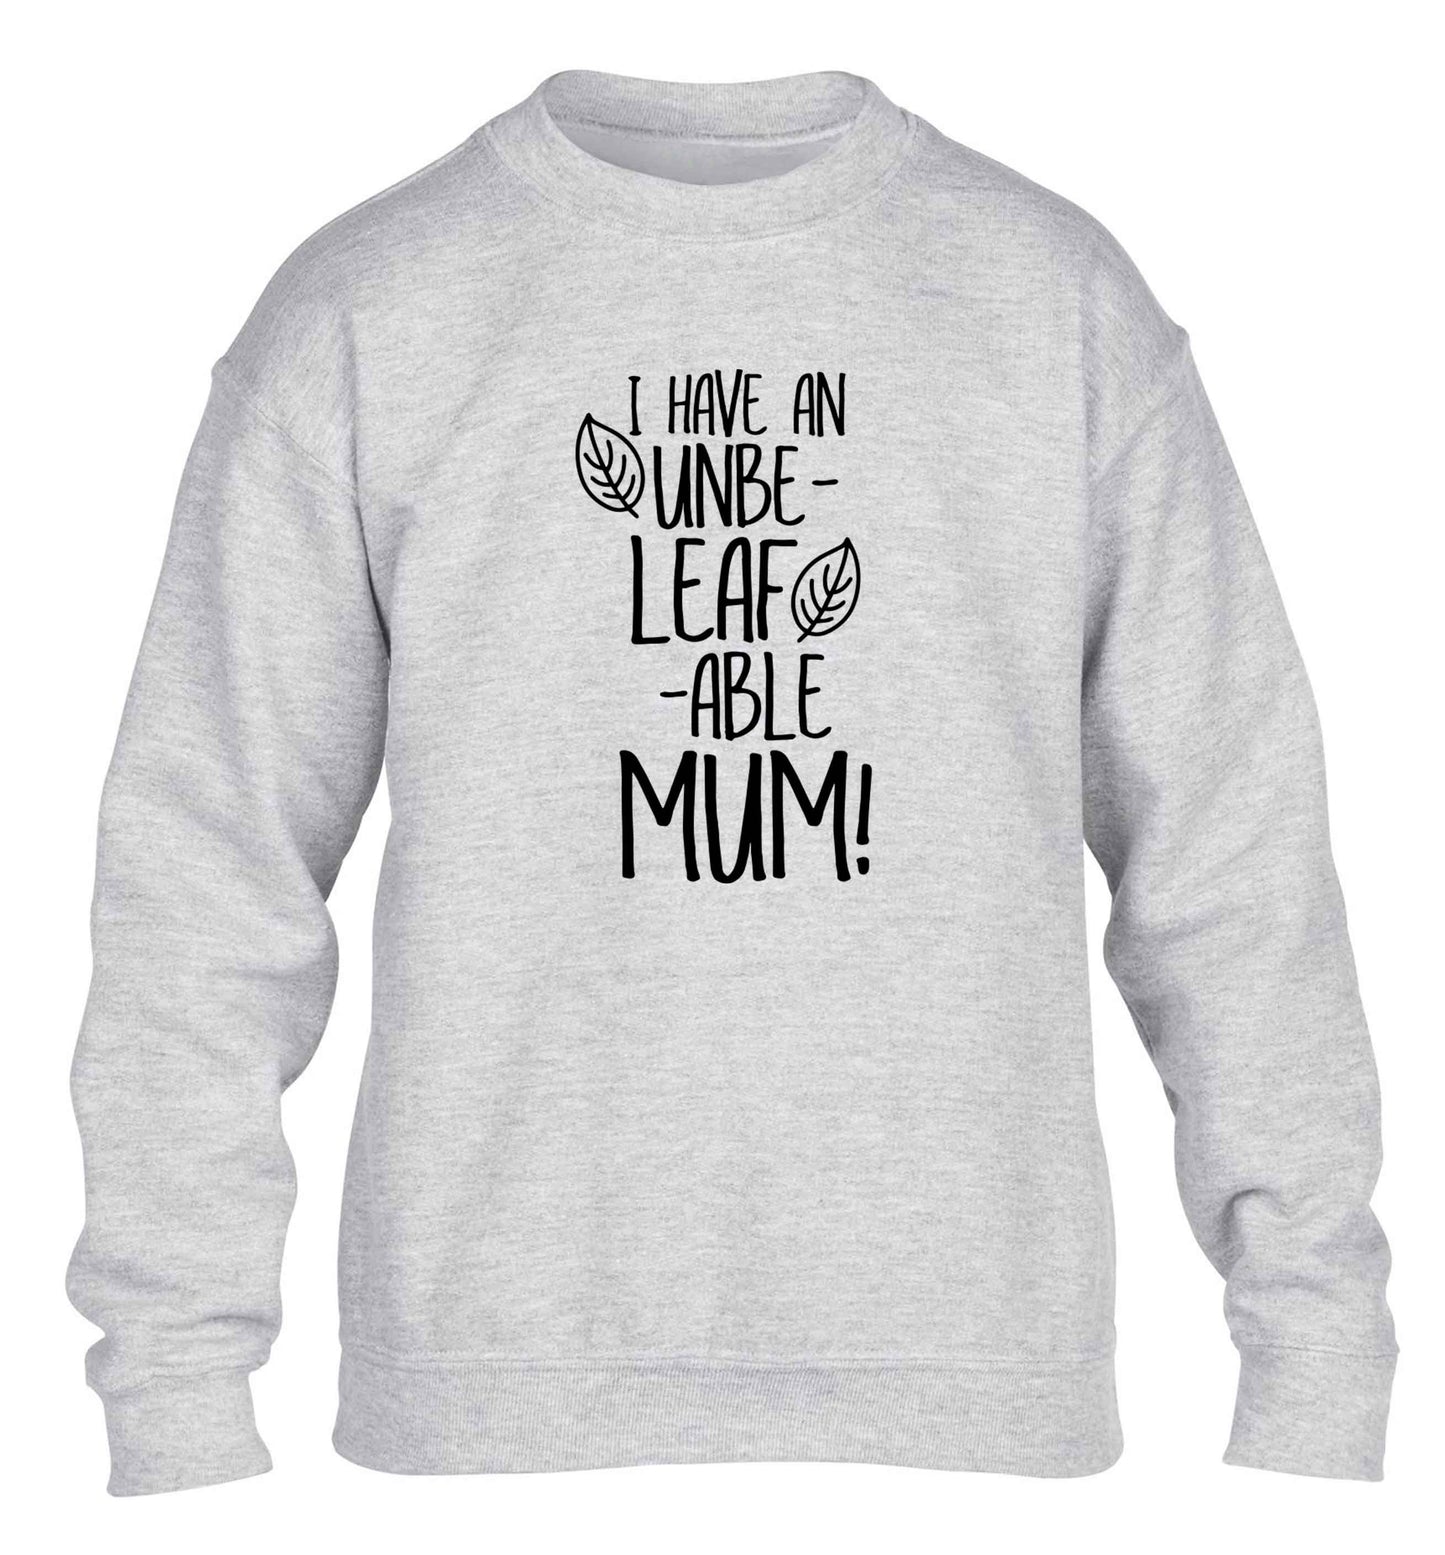 I have an unbeleafable mum! children's grey sweater 12-13 Years